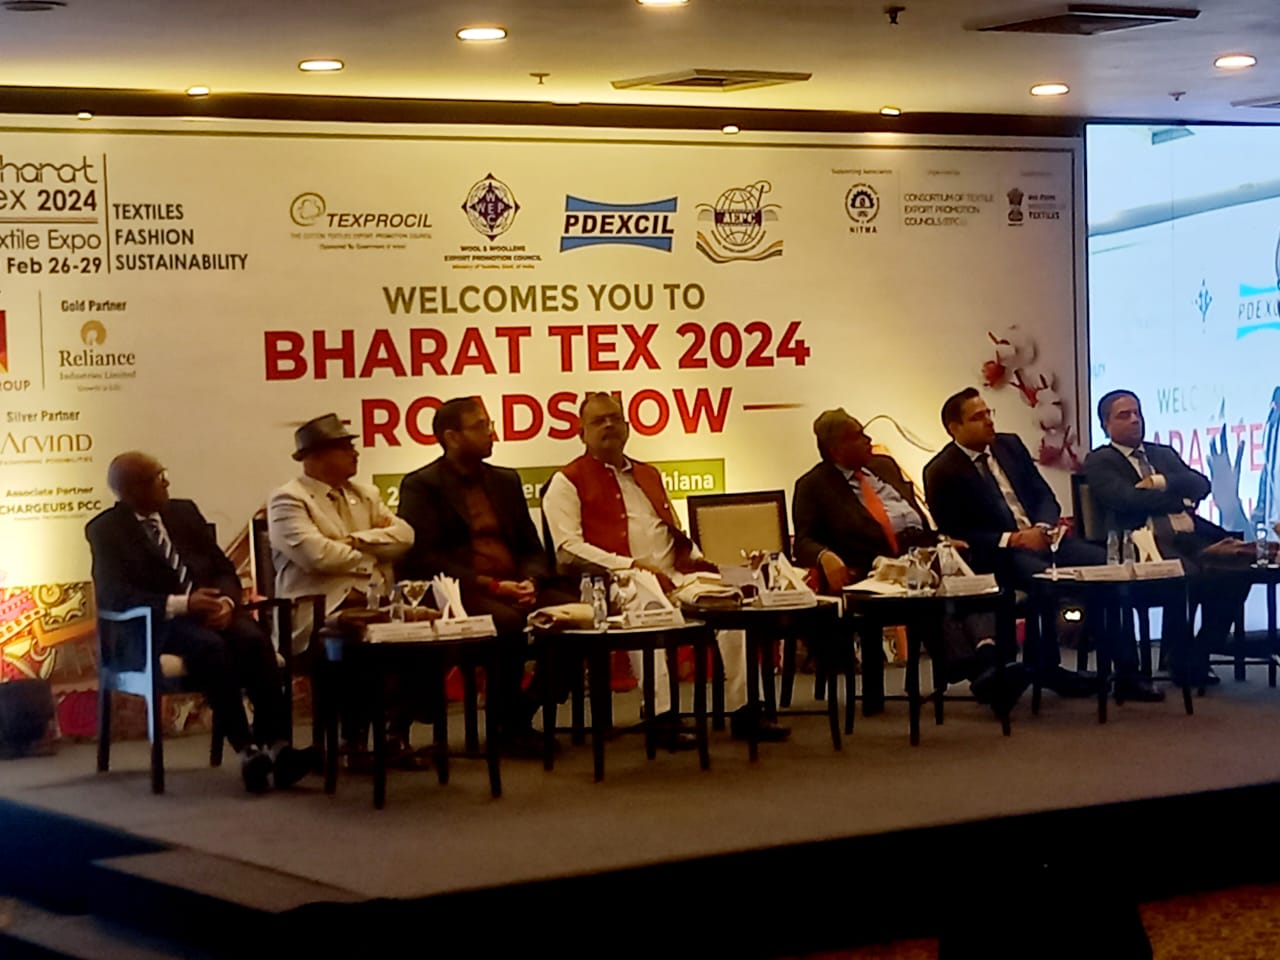 TEXPROCIL organised a Roadshow on Bharat Tex 2024 at Ludhiana on 20 December 2023